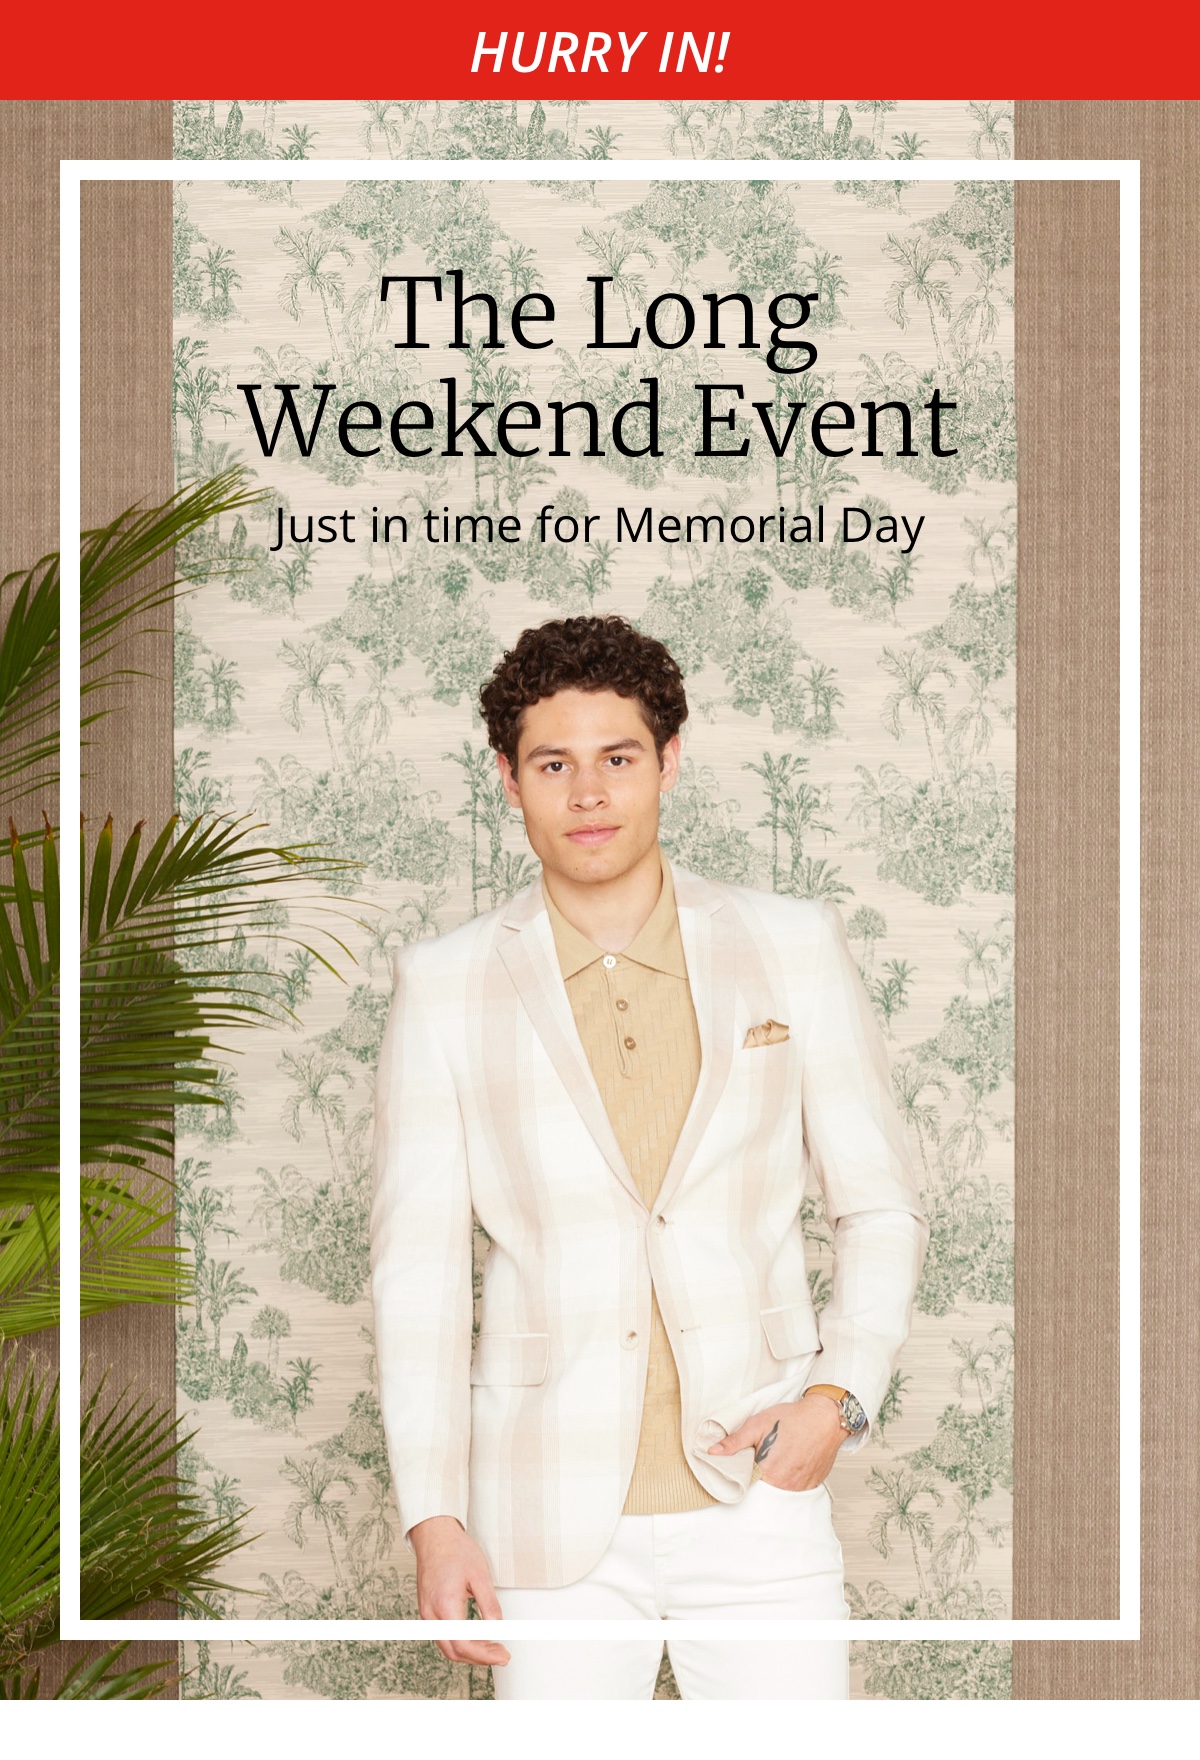 Hurry in!|The Long Weekend Event|Just in time for Memorial Day